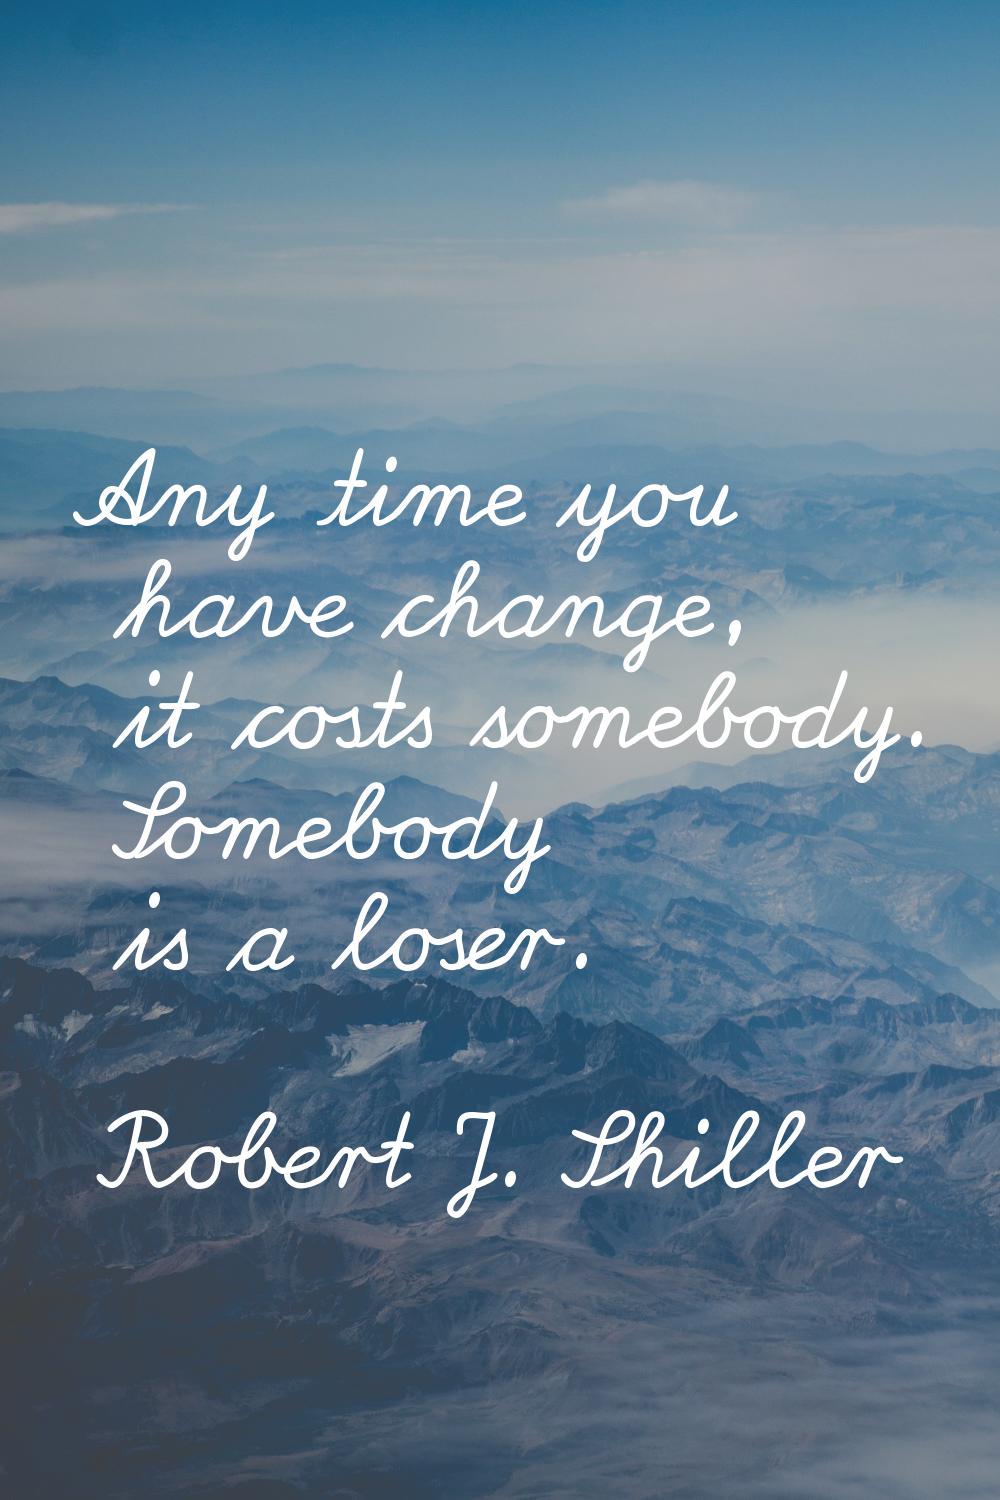 Any time you have change, it costs somebody. Somebody is a loser.